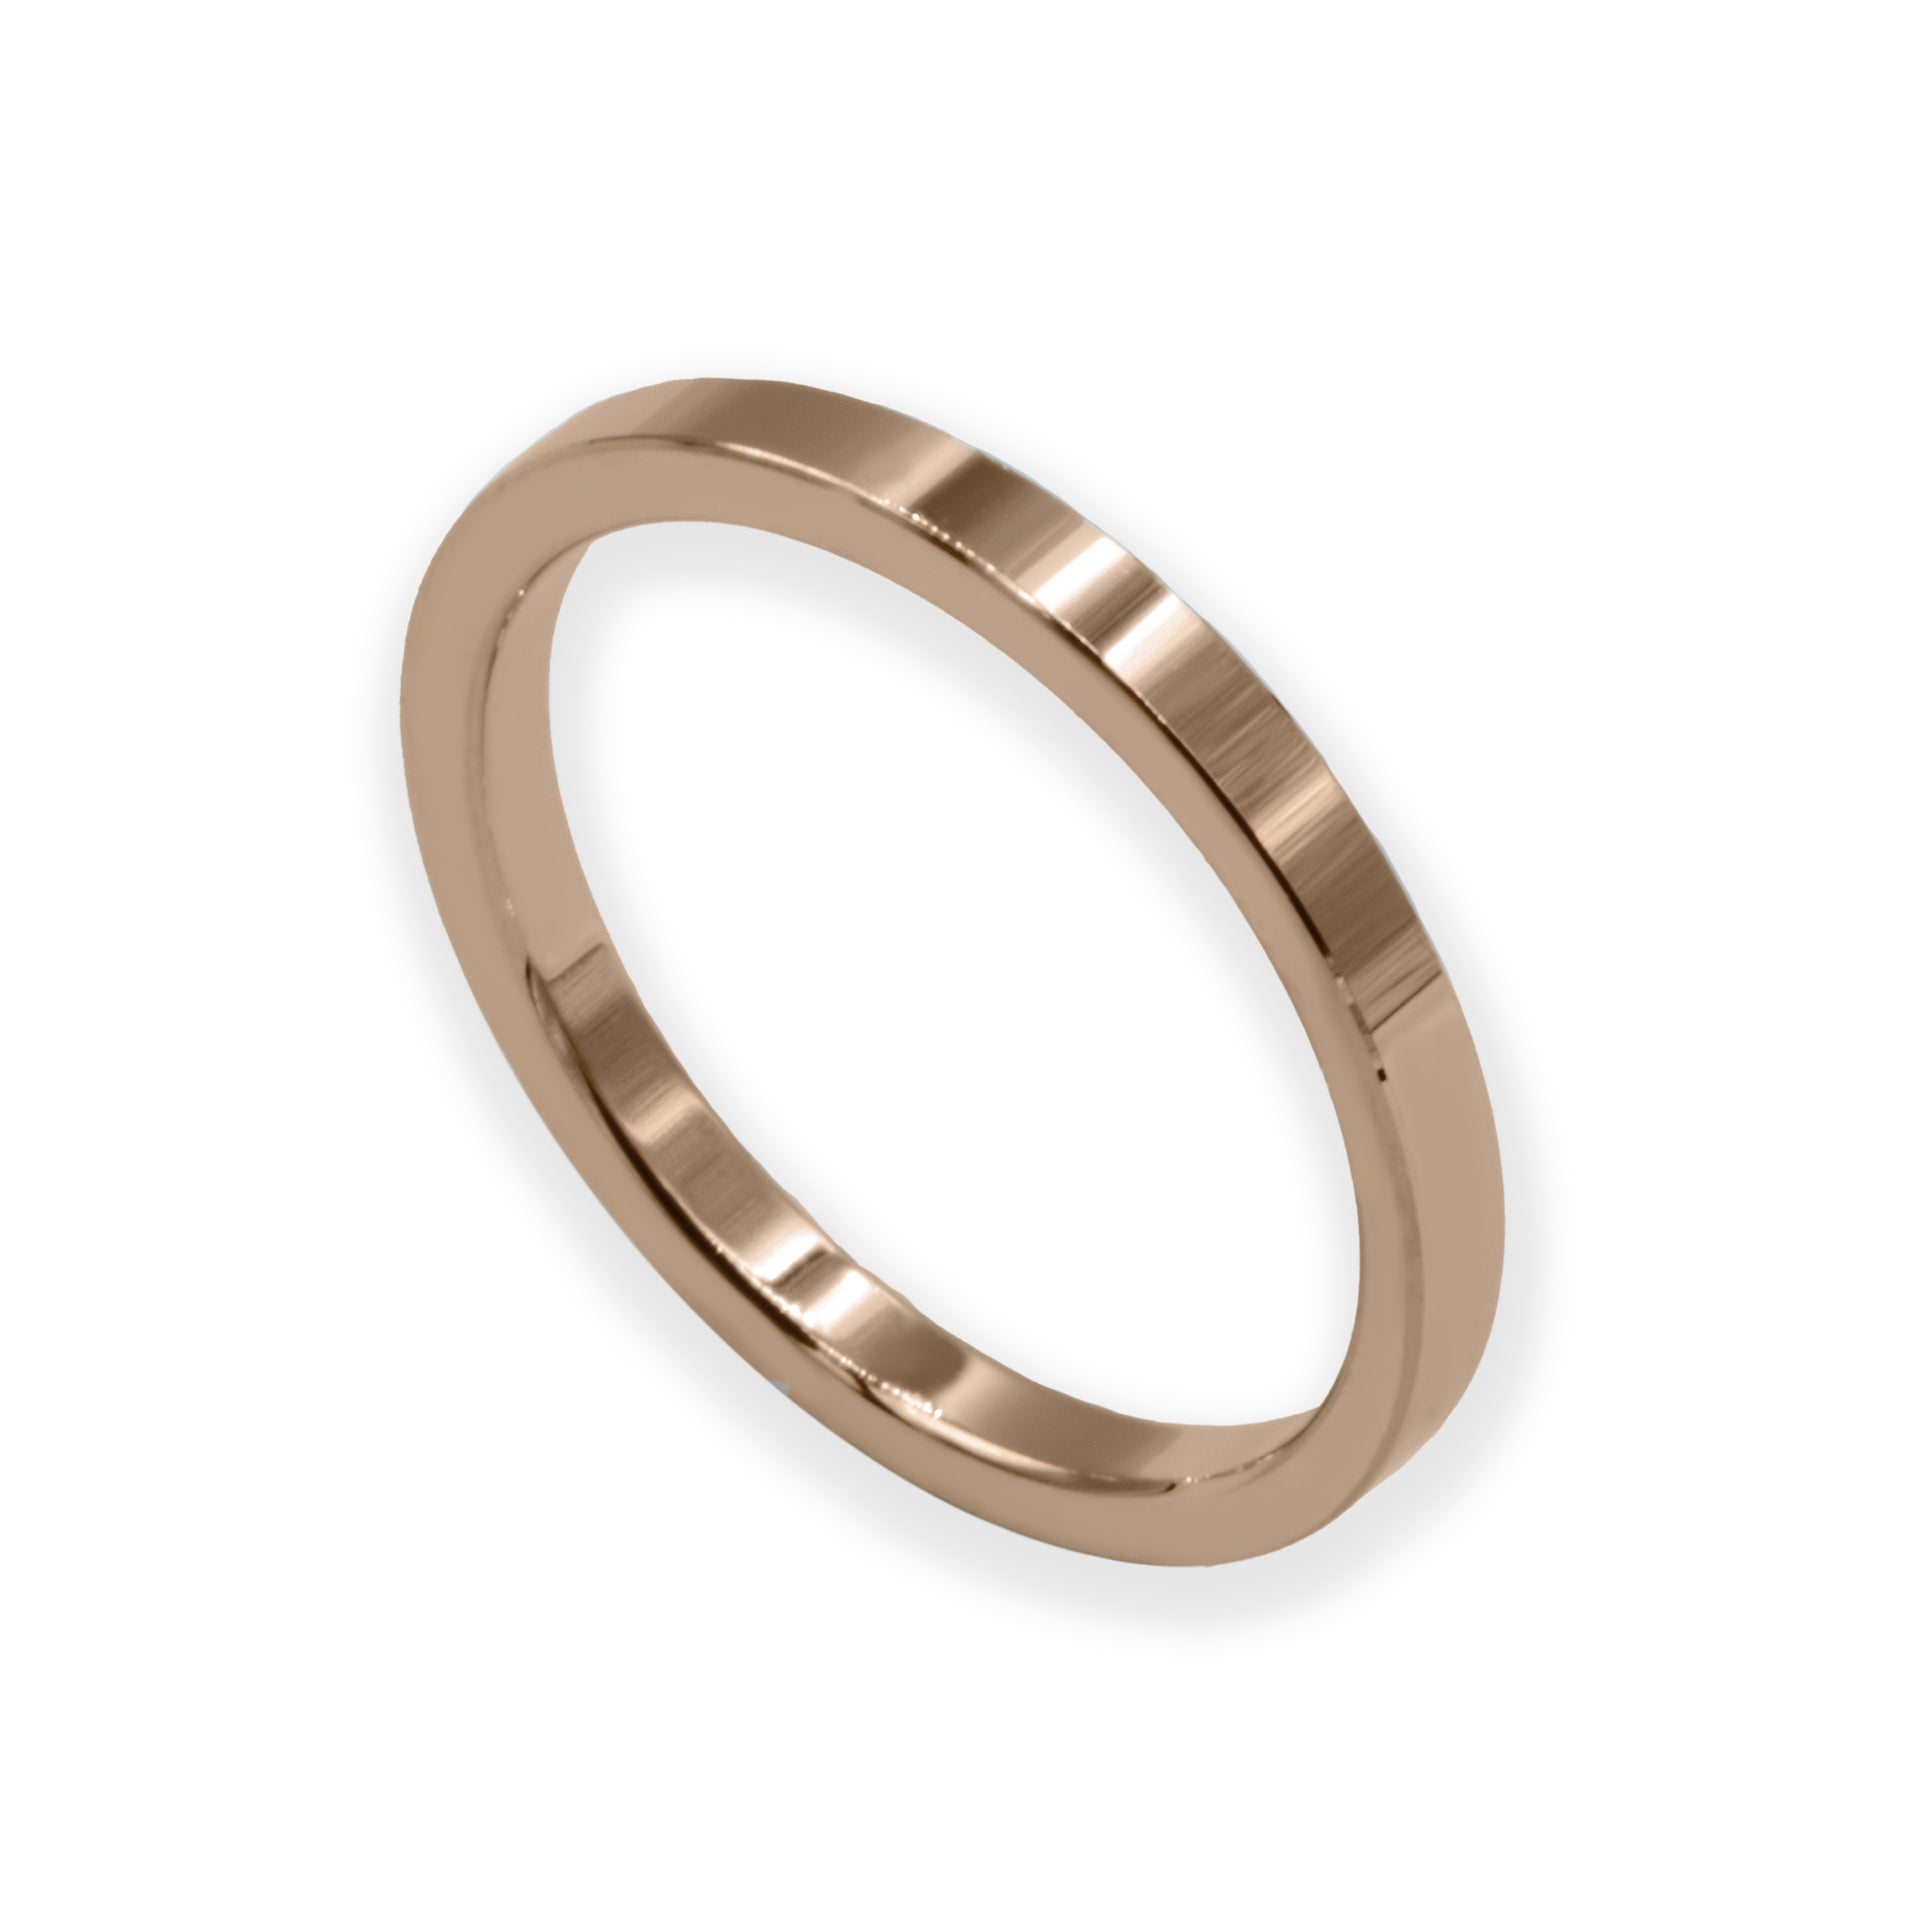 Ring EARTH IS ROUND 2mm flat profile red gold 18k